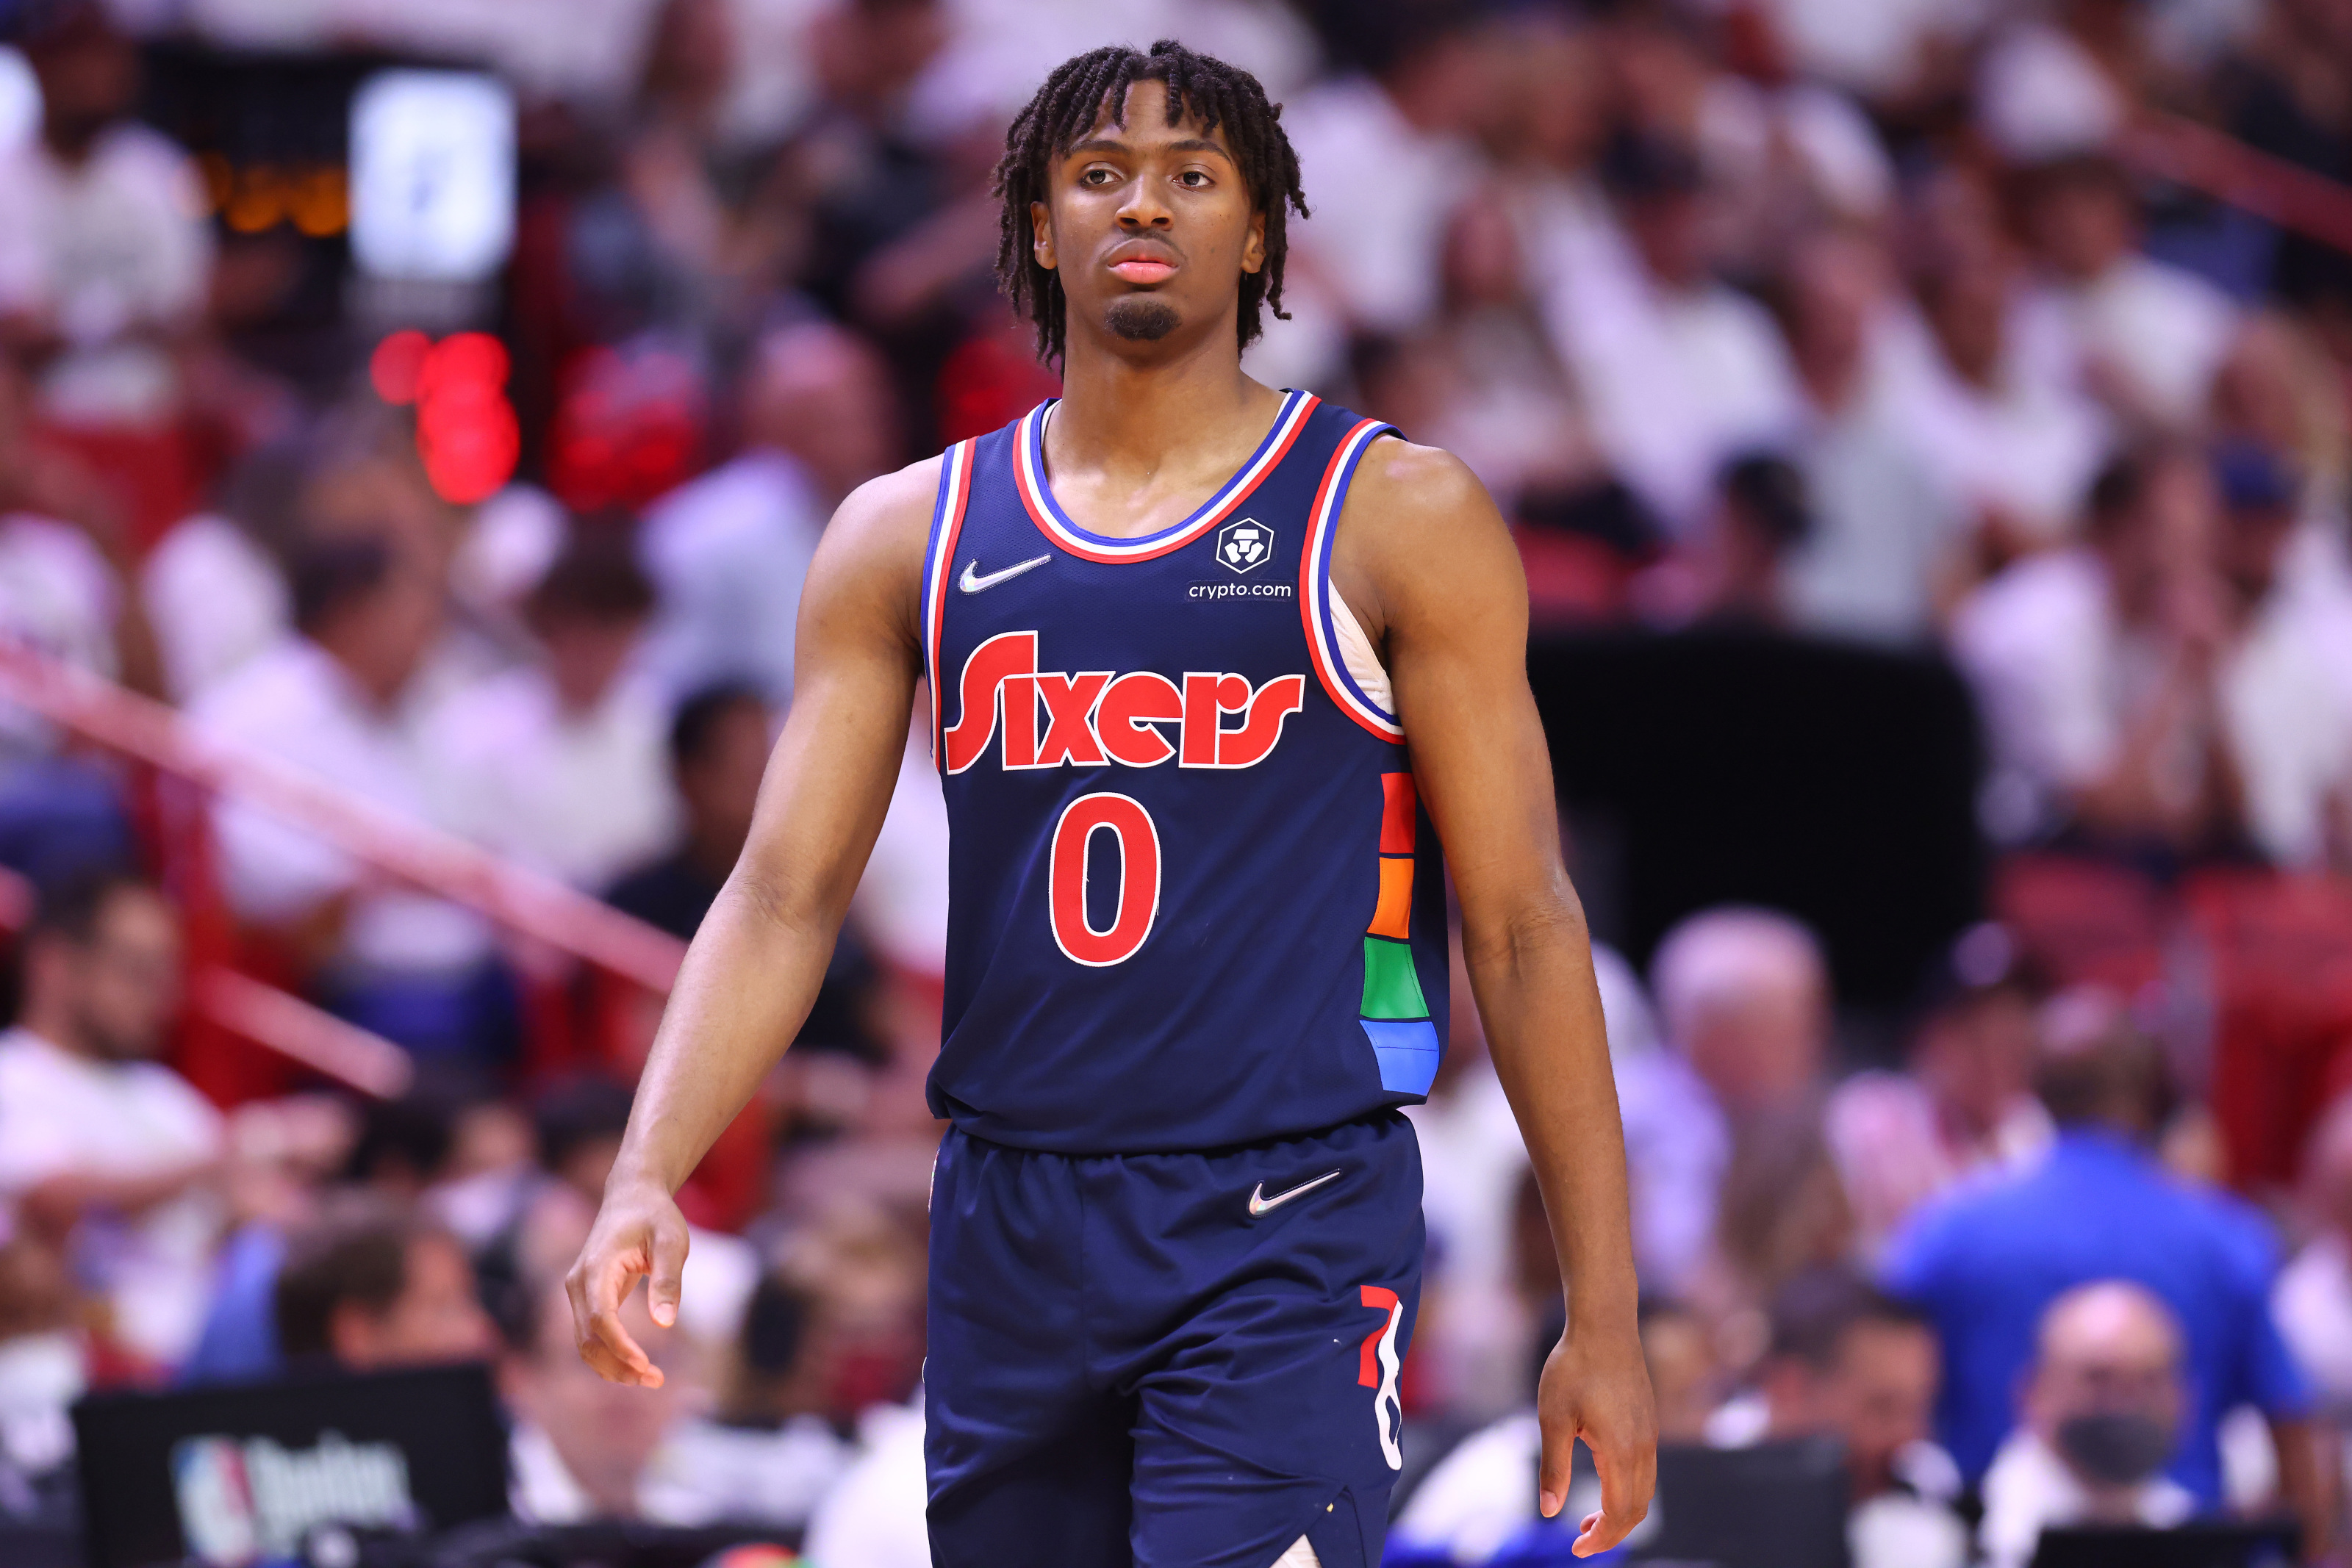 Sixers' Tyrese Maxey ranked 17th best player under the age of 25